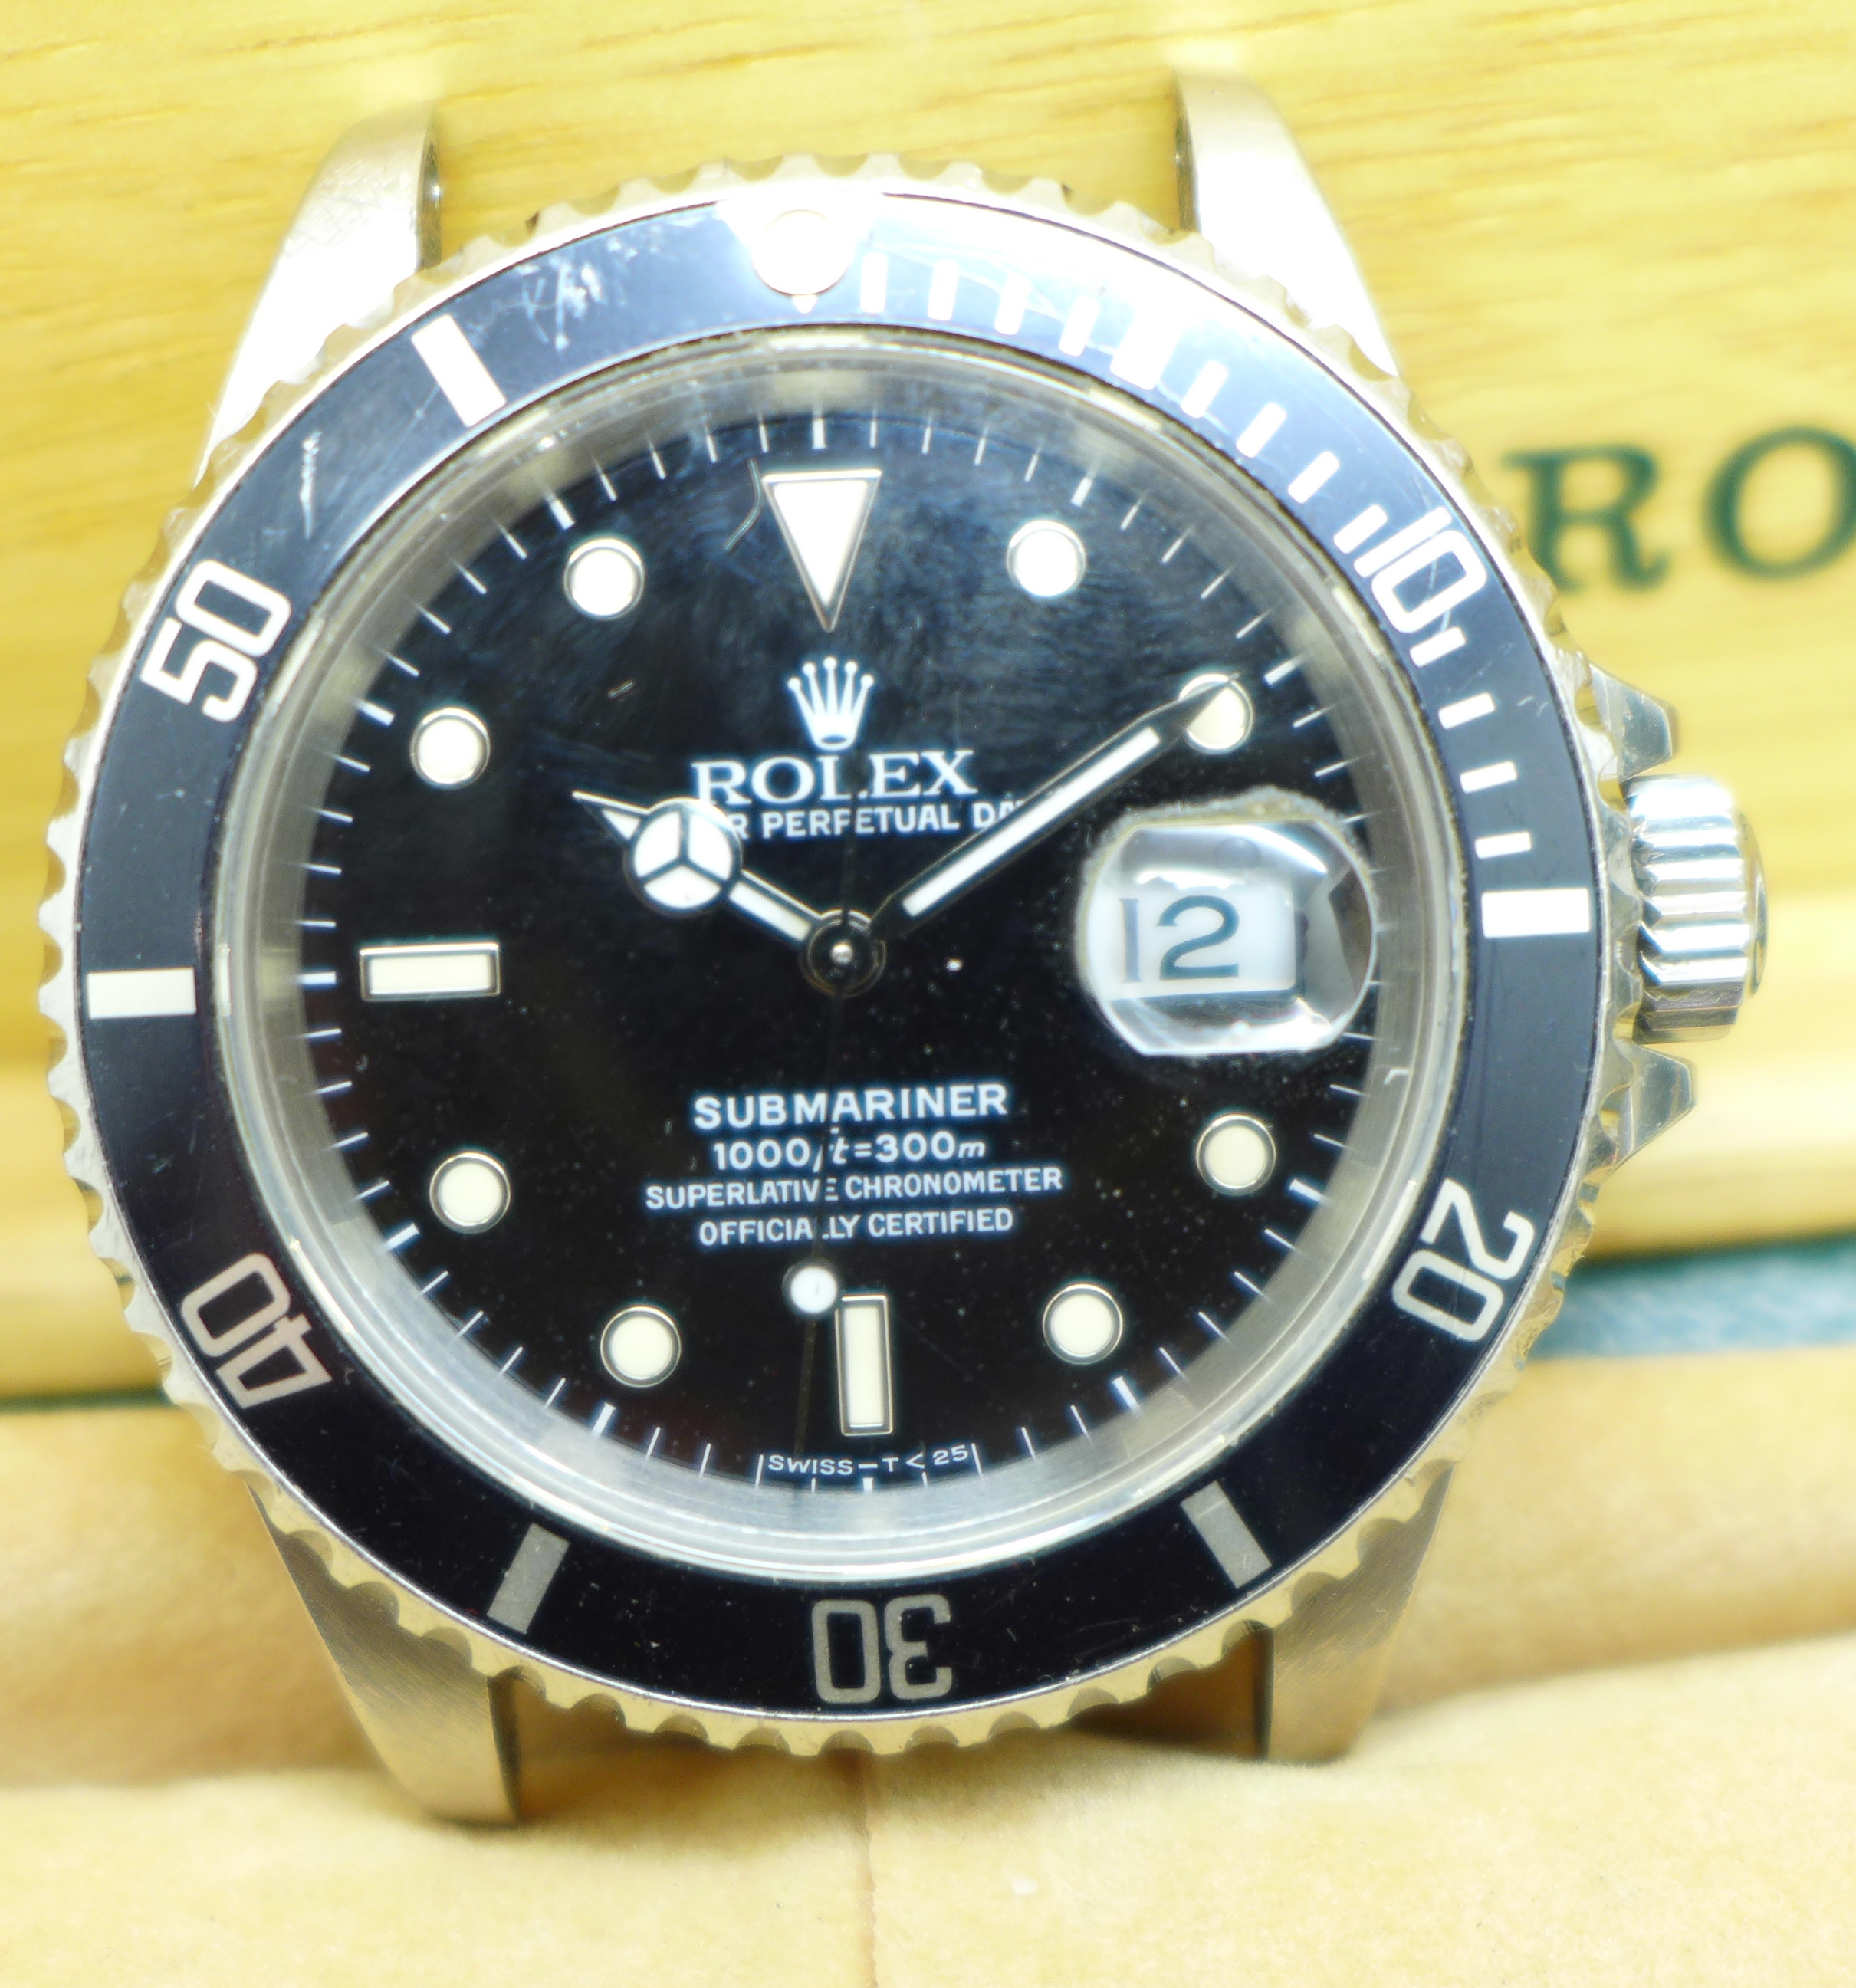 A Rolex Submariner Superlative Chronometer Date wristwatch, 1000ft=300m, ref. 16610, serial number - Image 3 of 18